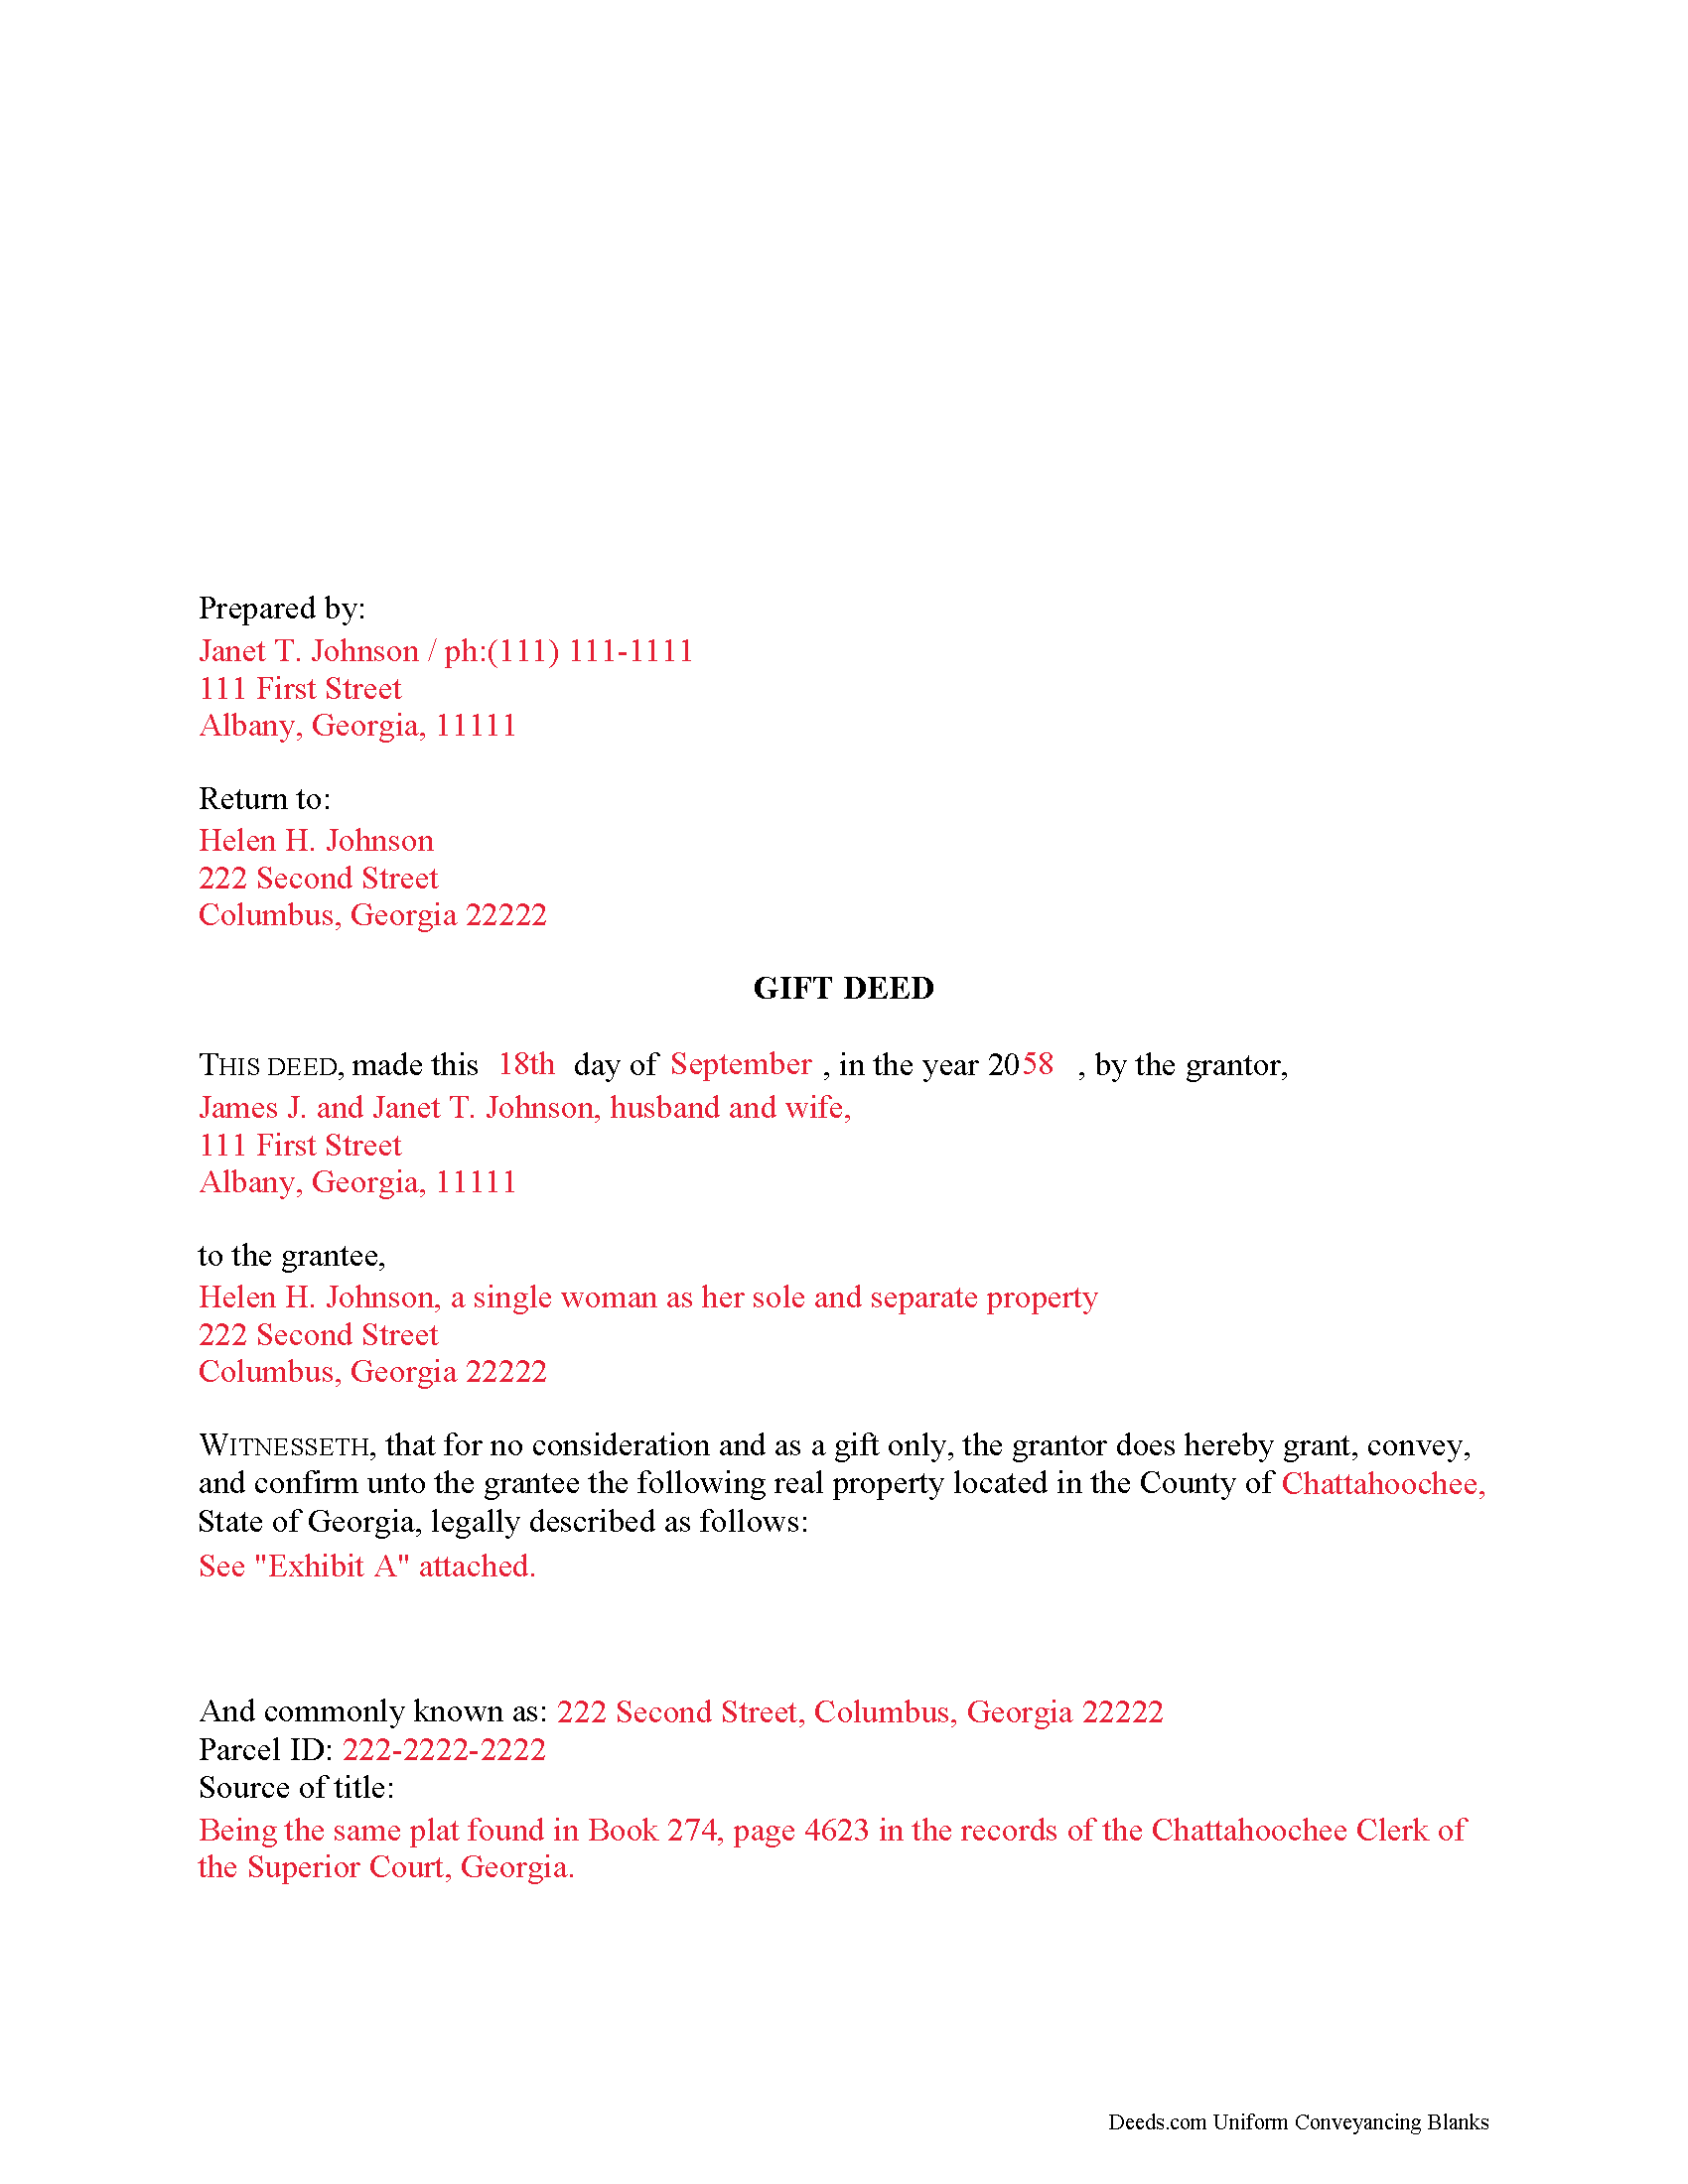 Completed Example of the Gift Deed Document